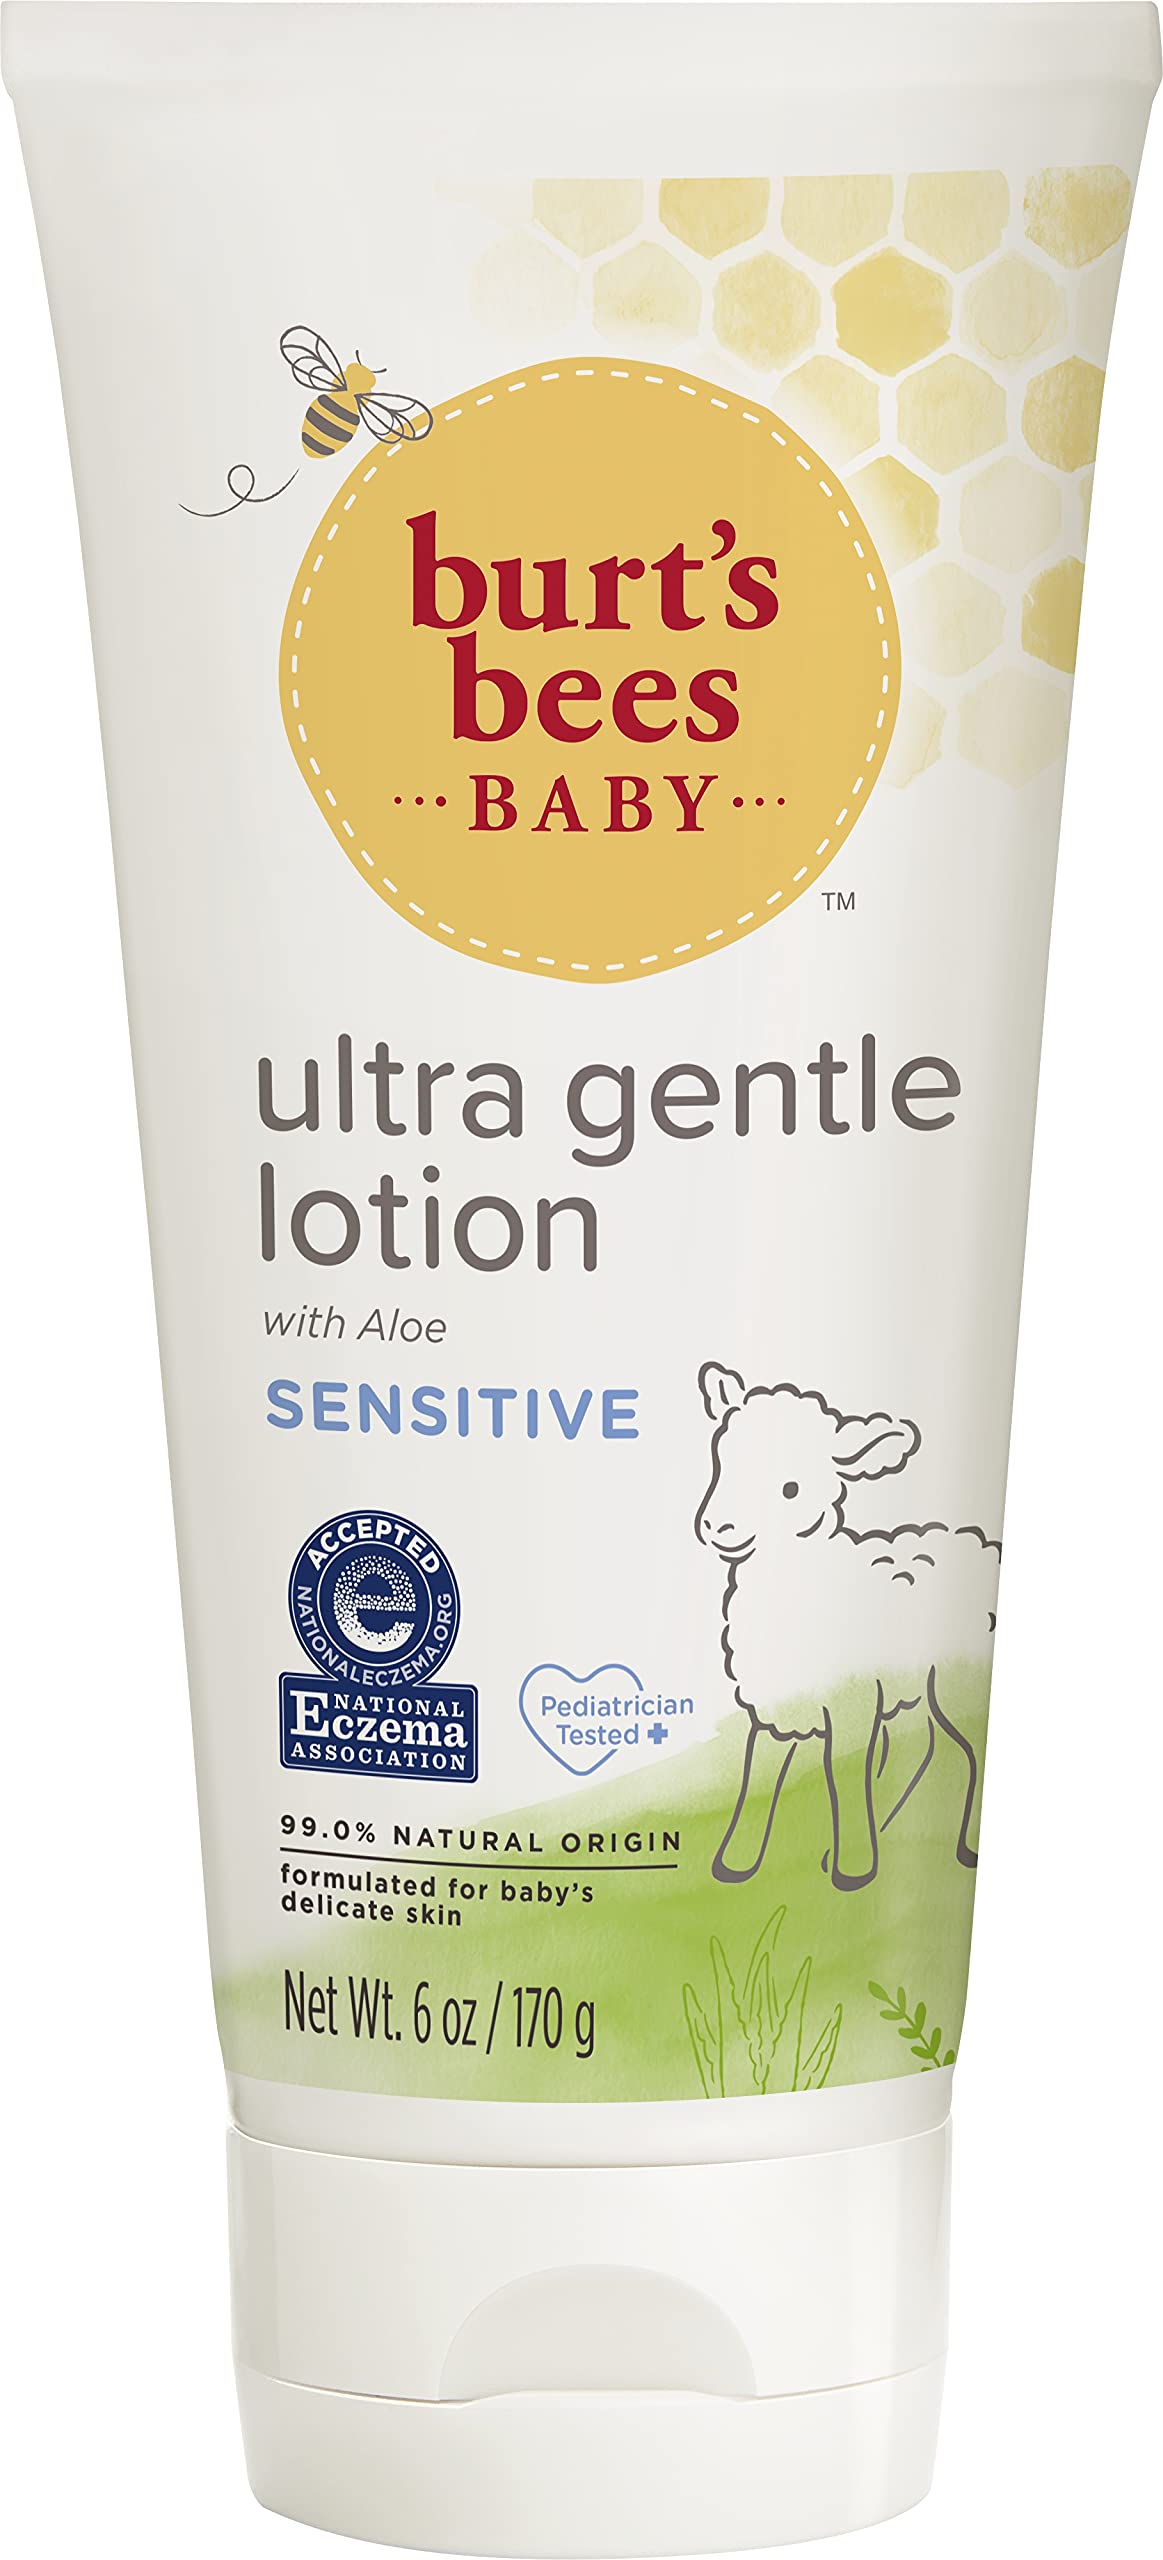 Burt's Bees Baby Ultra Gentle Lotion for Sensitive Skin - 6 Ounces - Pack of 3